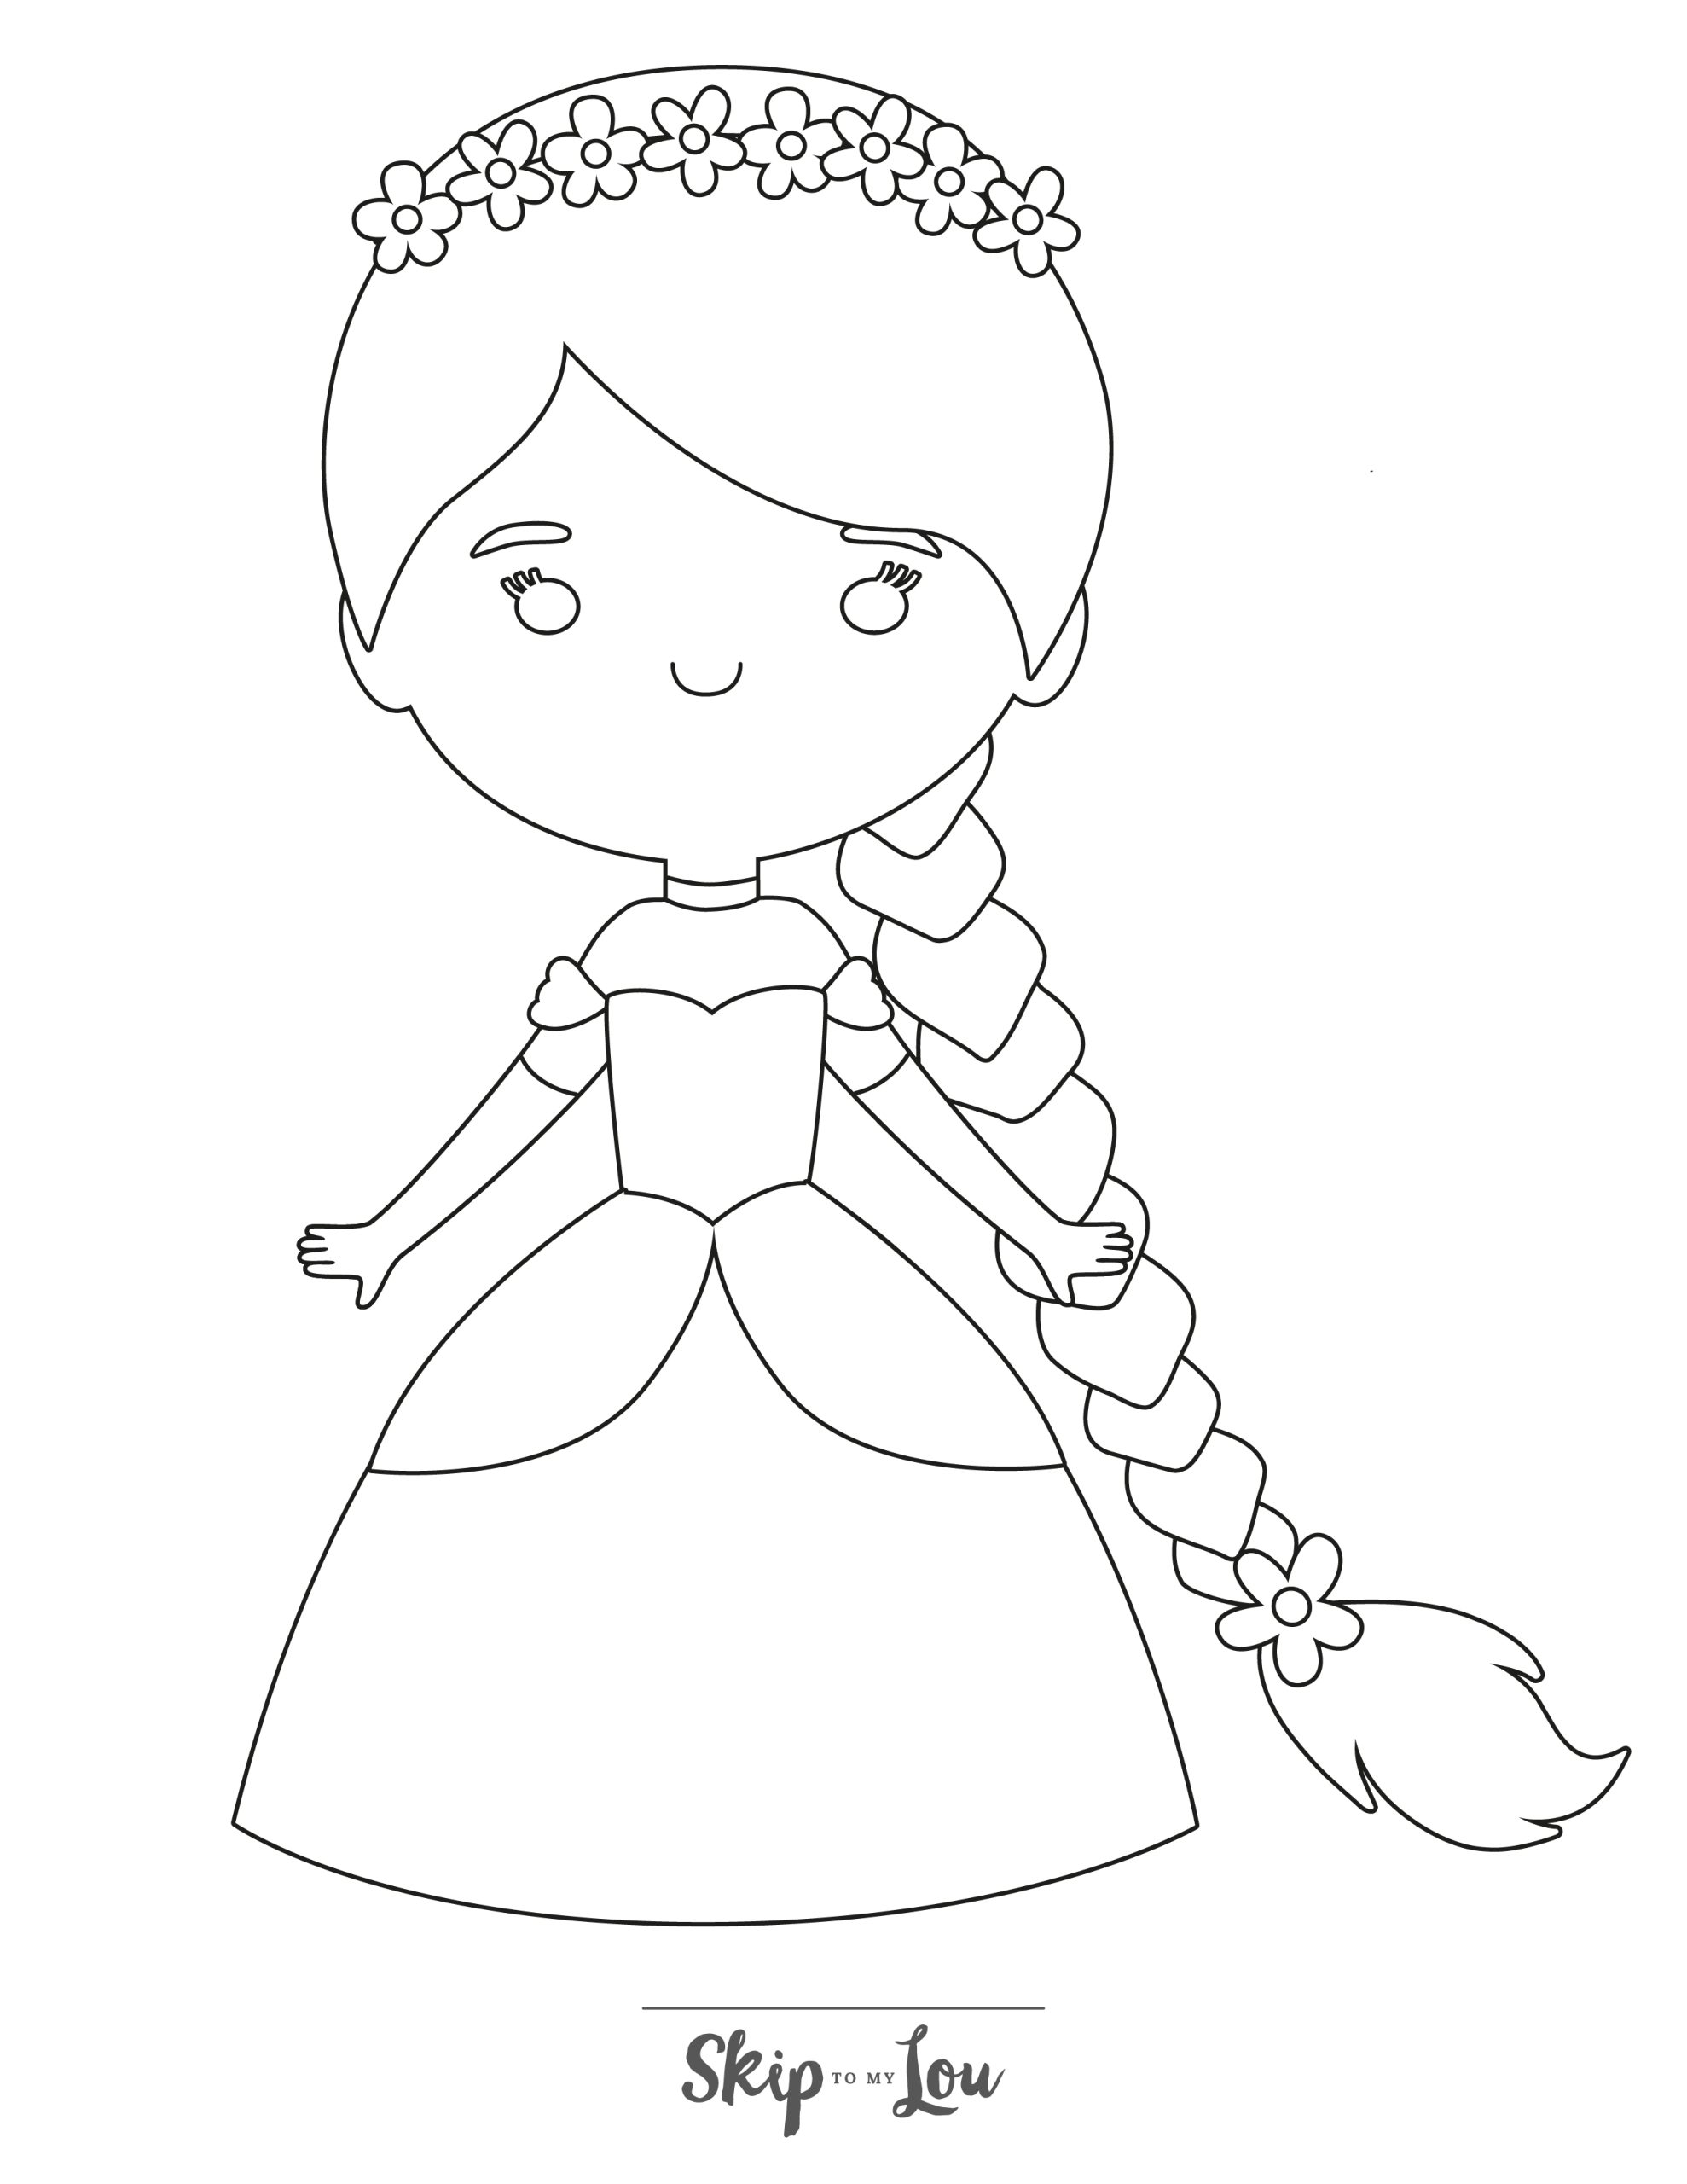 Rapunzel Coloring Page 9 - Simple line drawing of Rapunzel wearing a wide dress